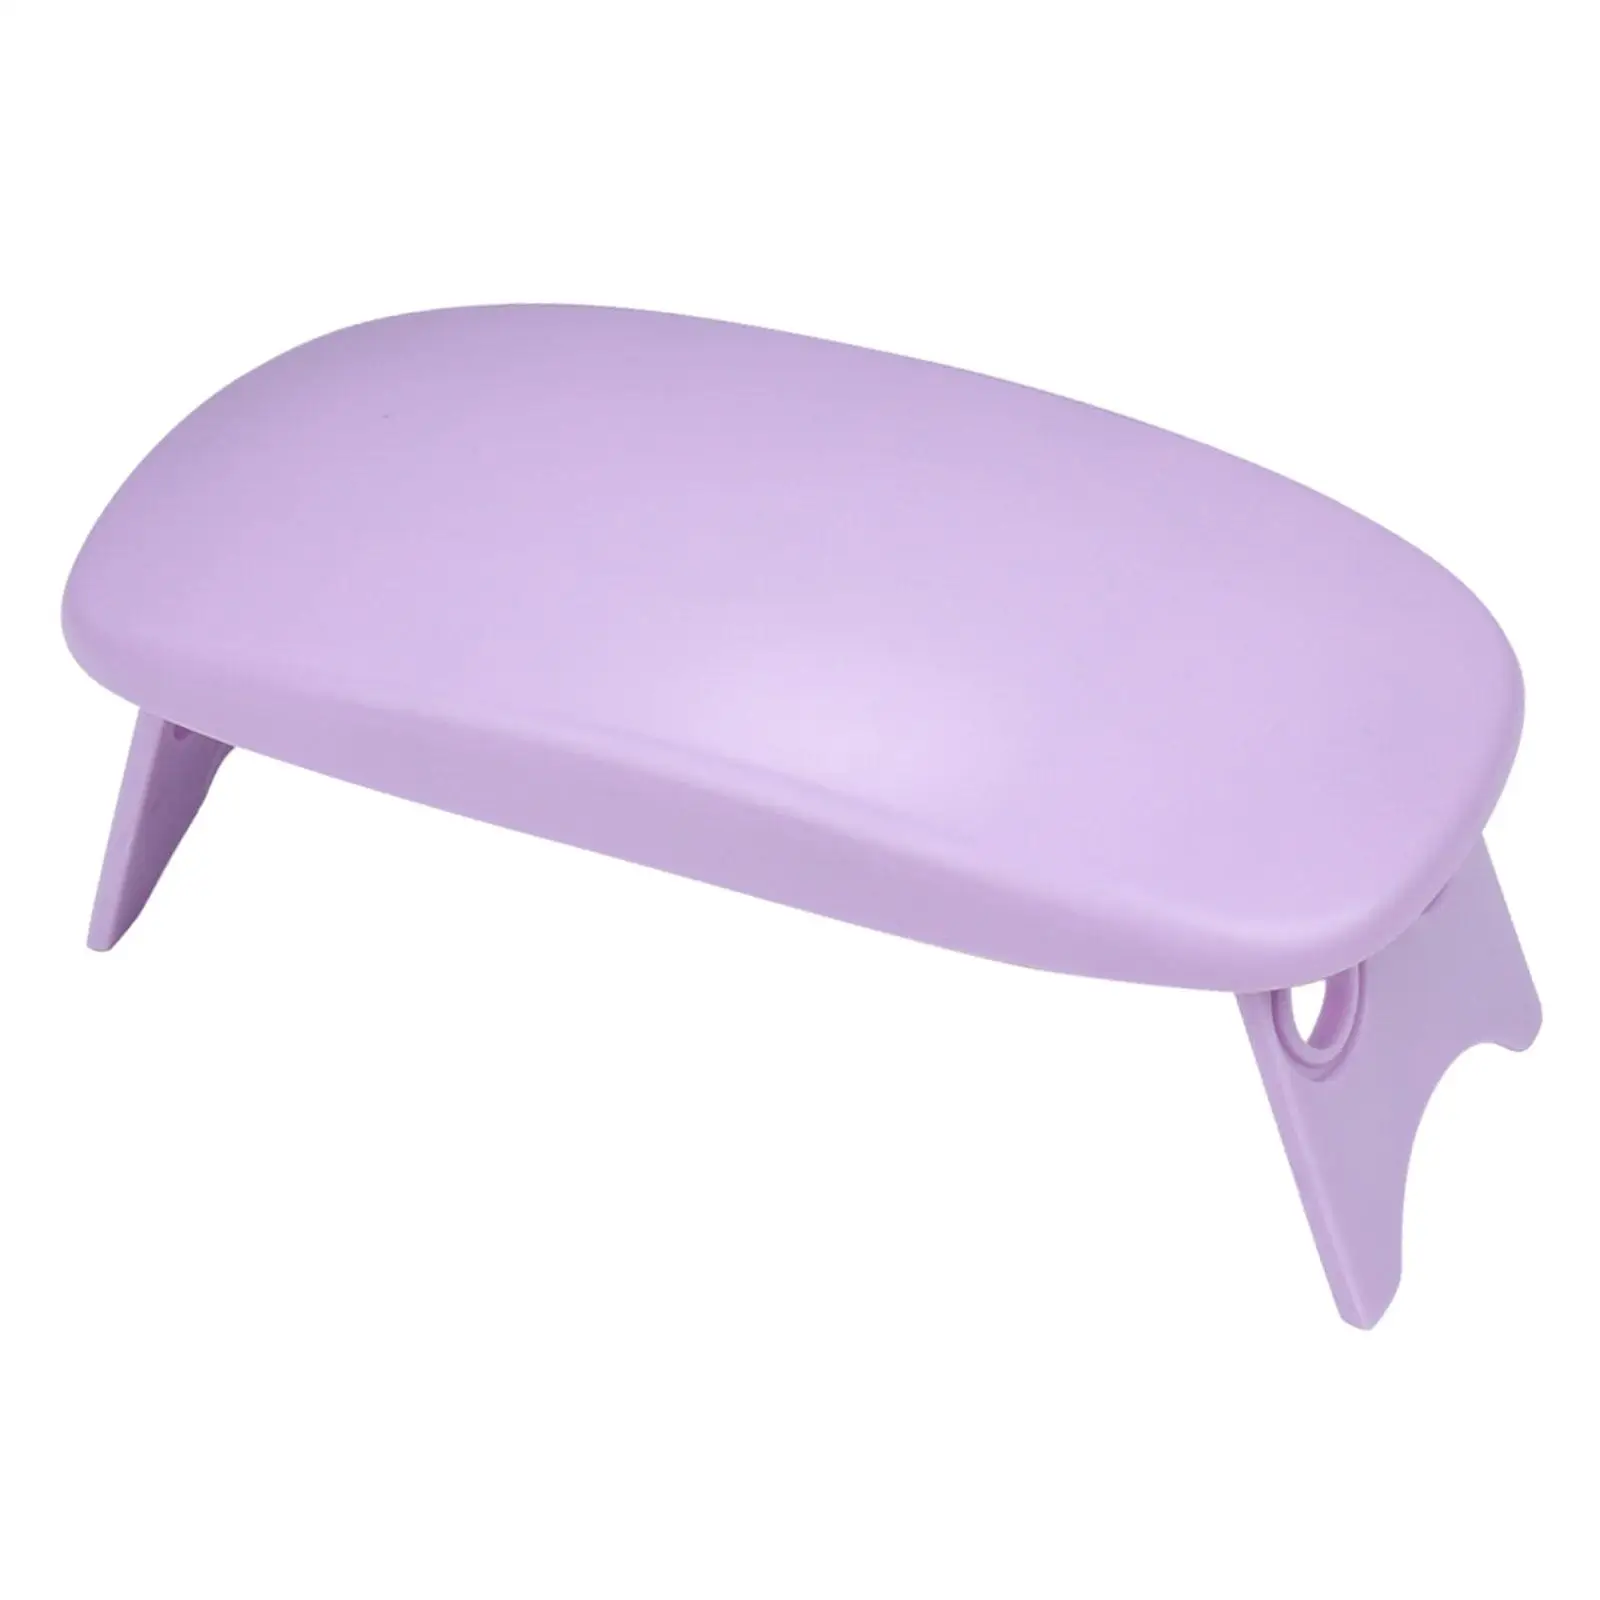 Nail Arm Rest Stand Salons Comfortable Home DIY Table Desk Station Manicure Hand Pillow Hand Rest Foldable Manicure Pillow